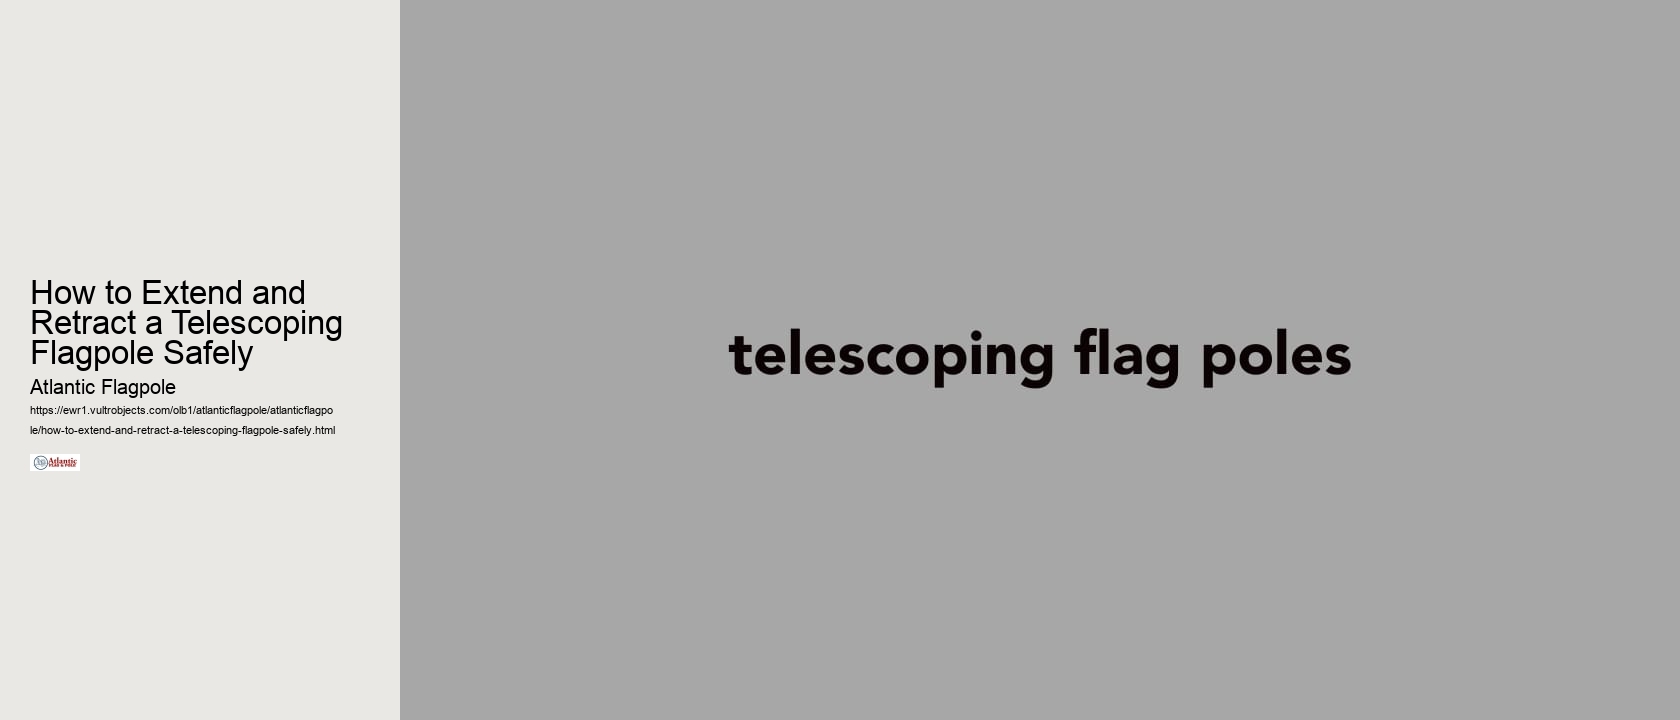 How to Extend and Retract a Telescoping Flagpole Safely